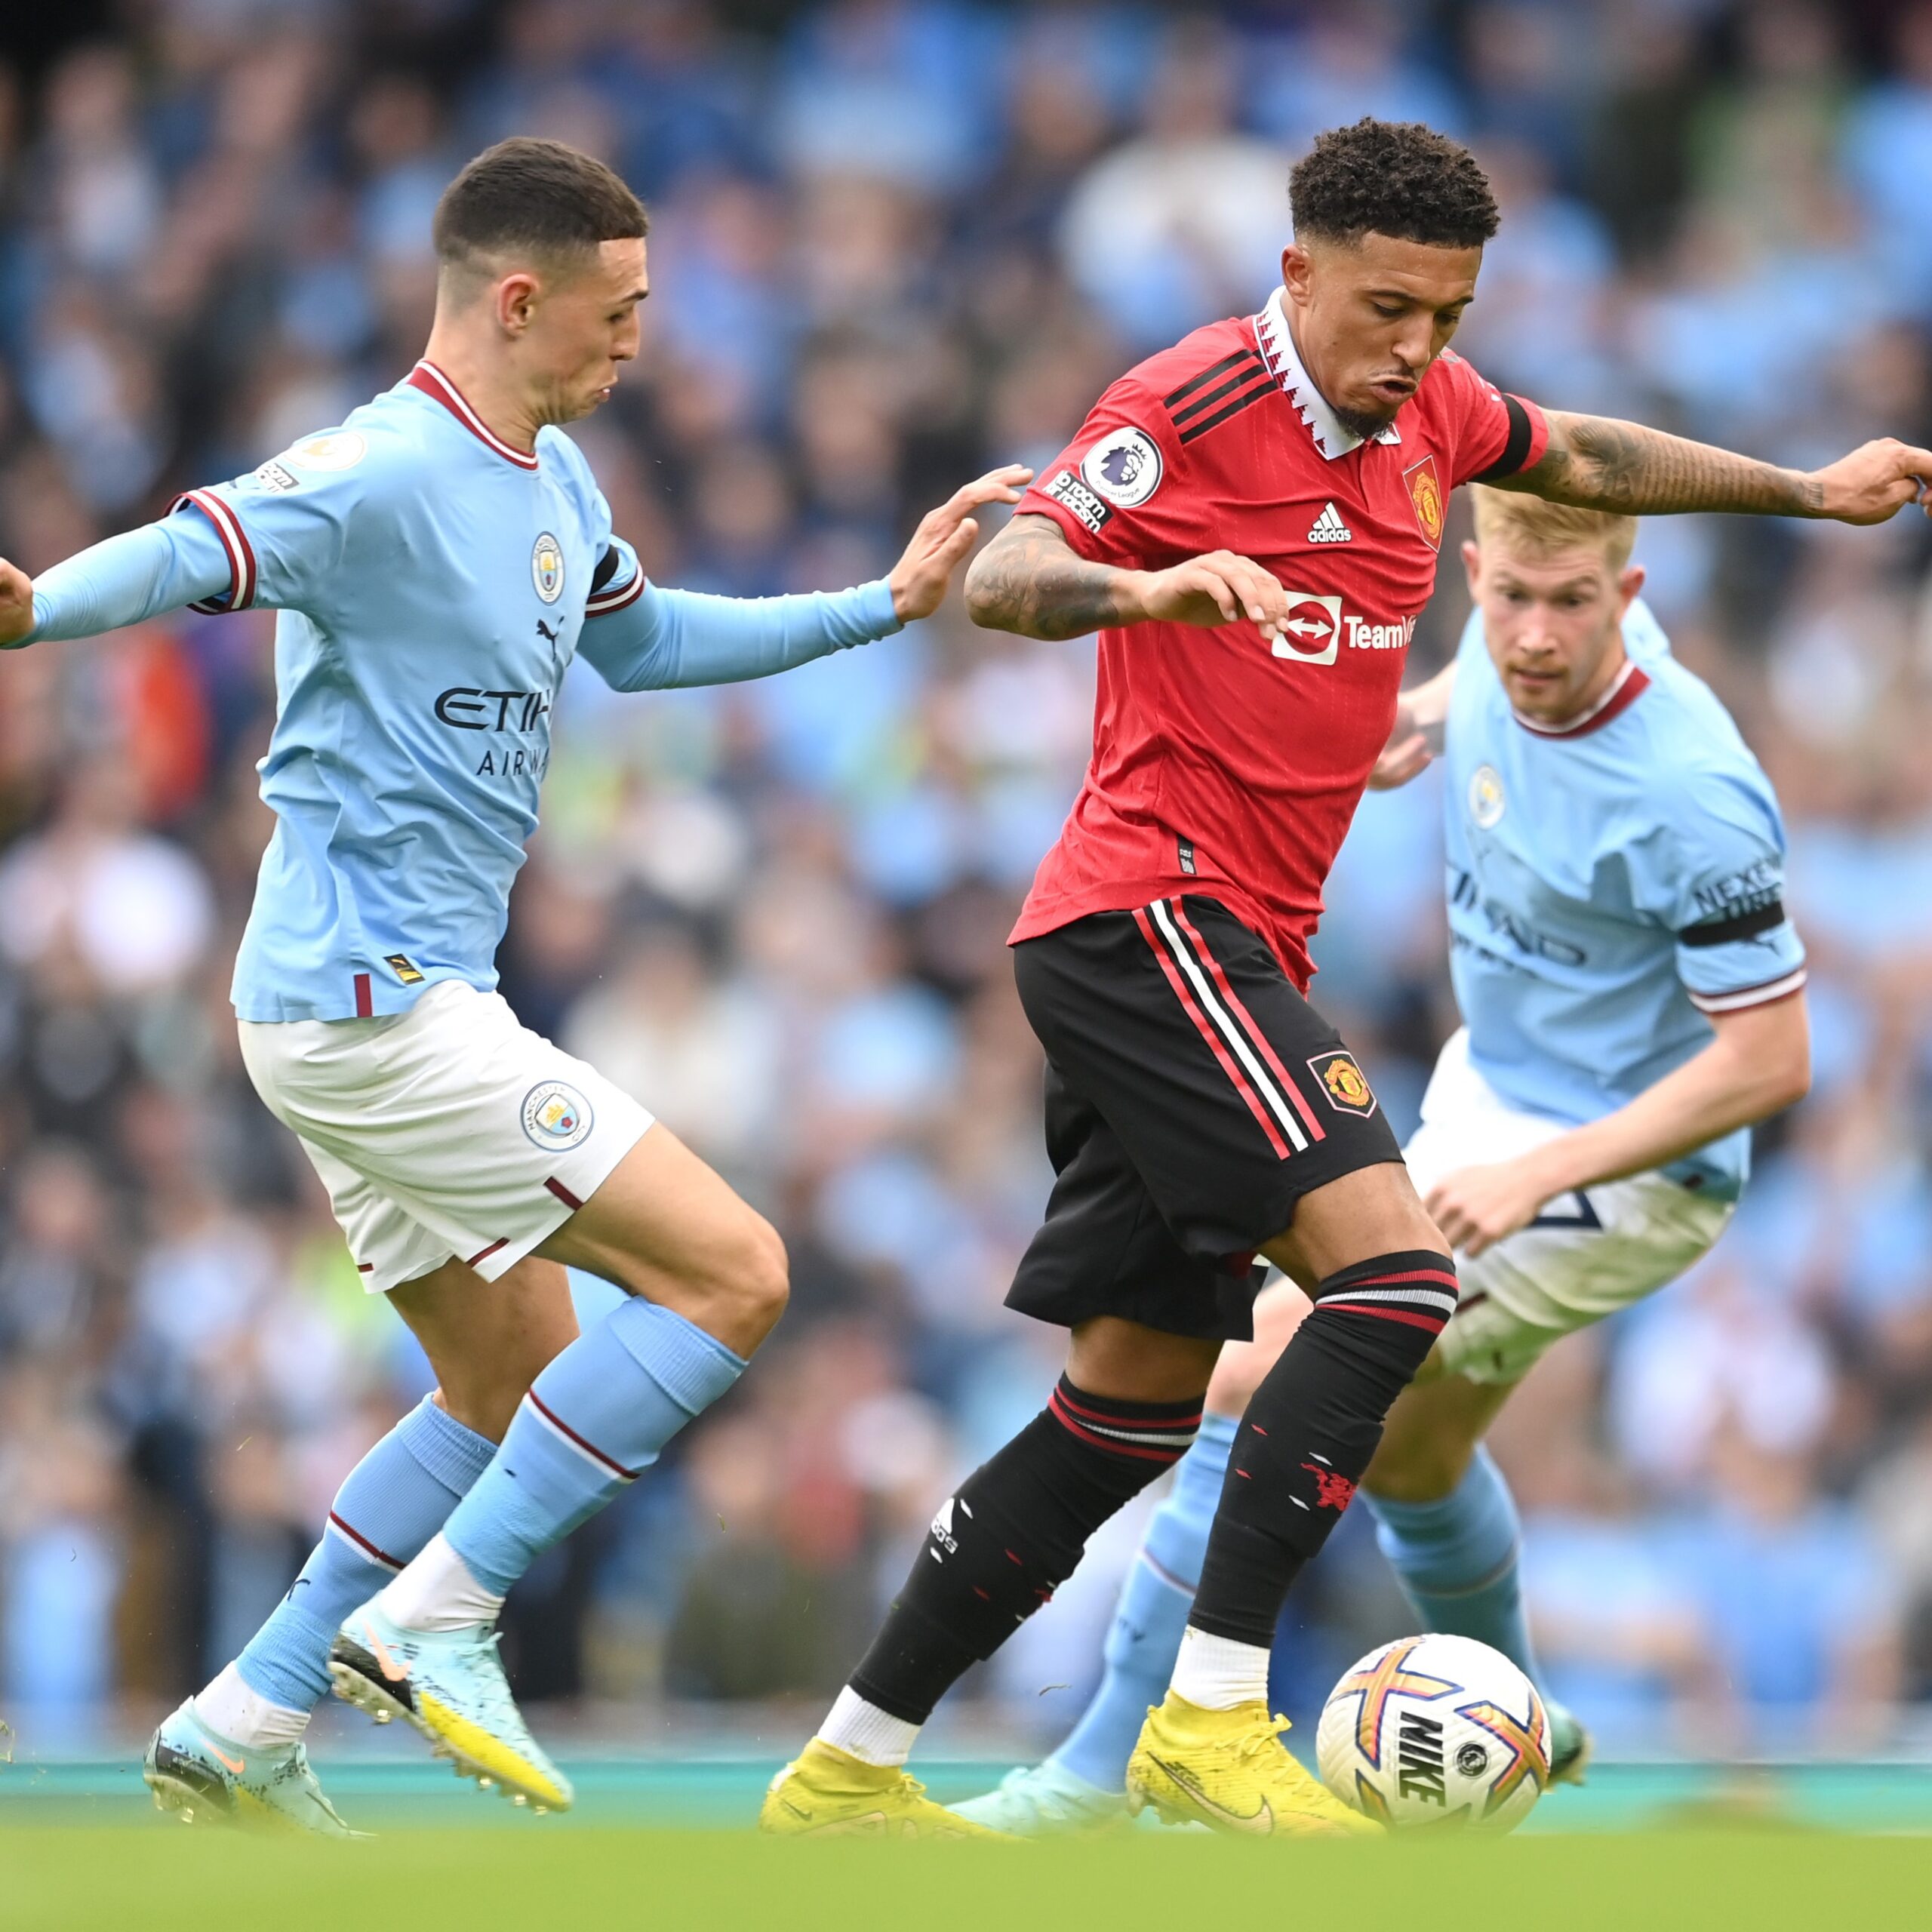 The result of the match between Manchester City and Manchester United in the English Premier League